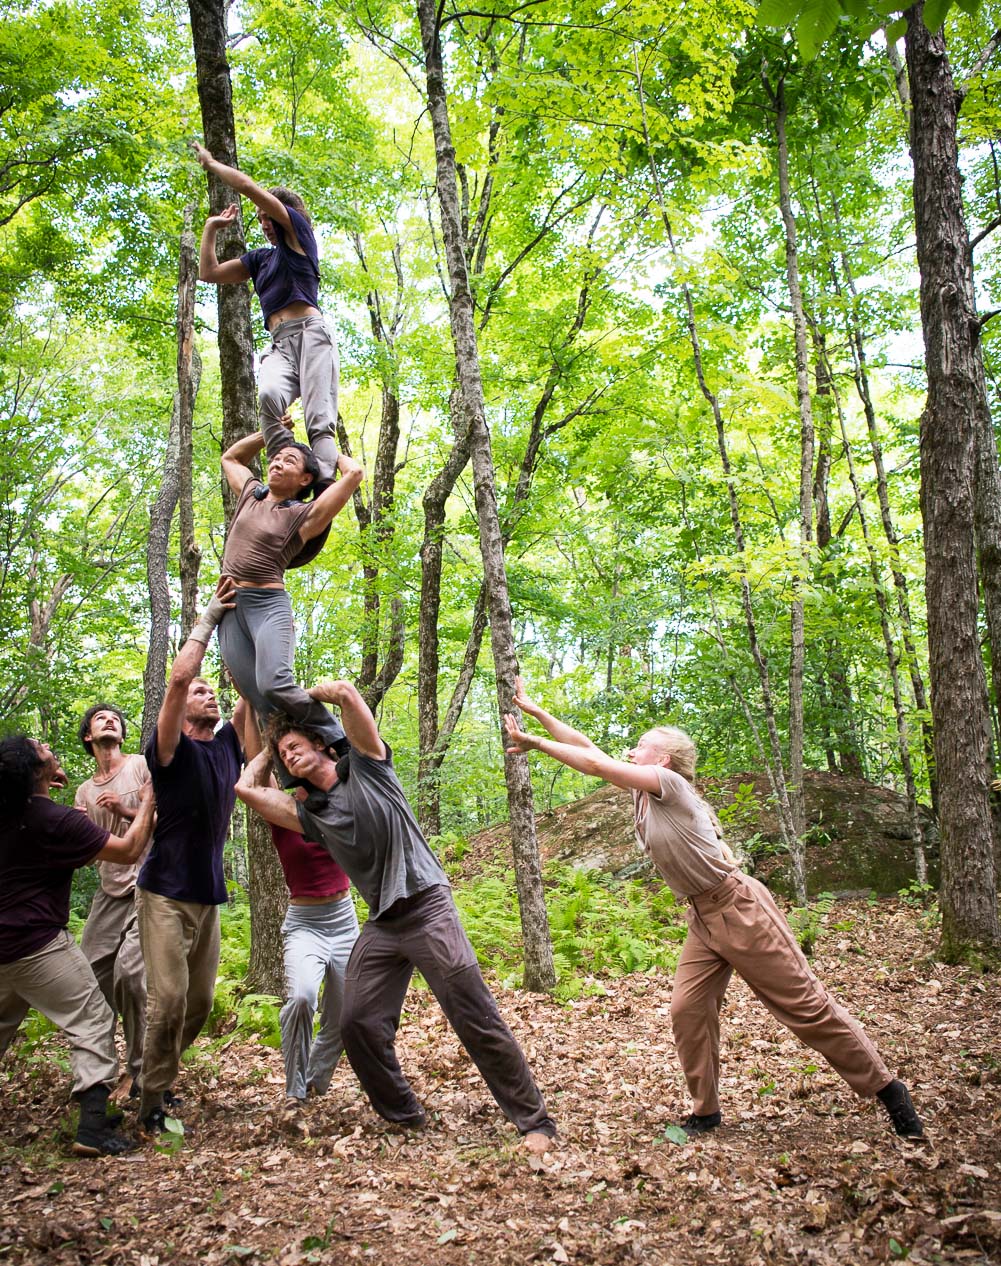 In a forest, one group of performers holds a person high overhead while another reaches to save them